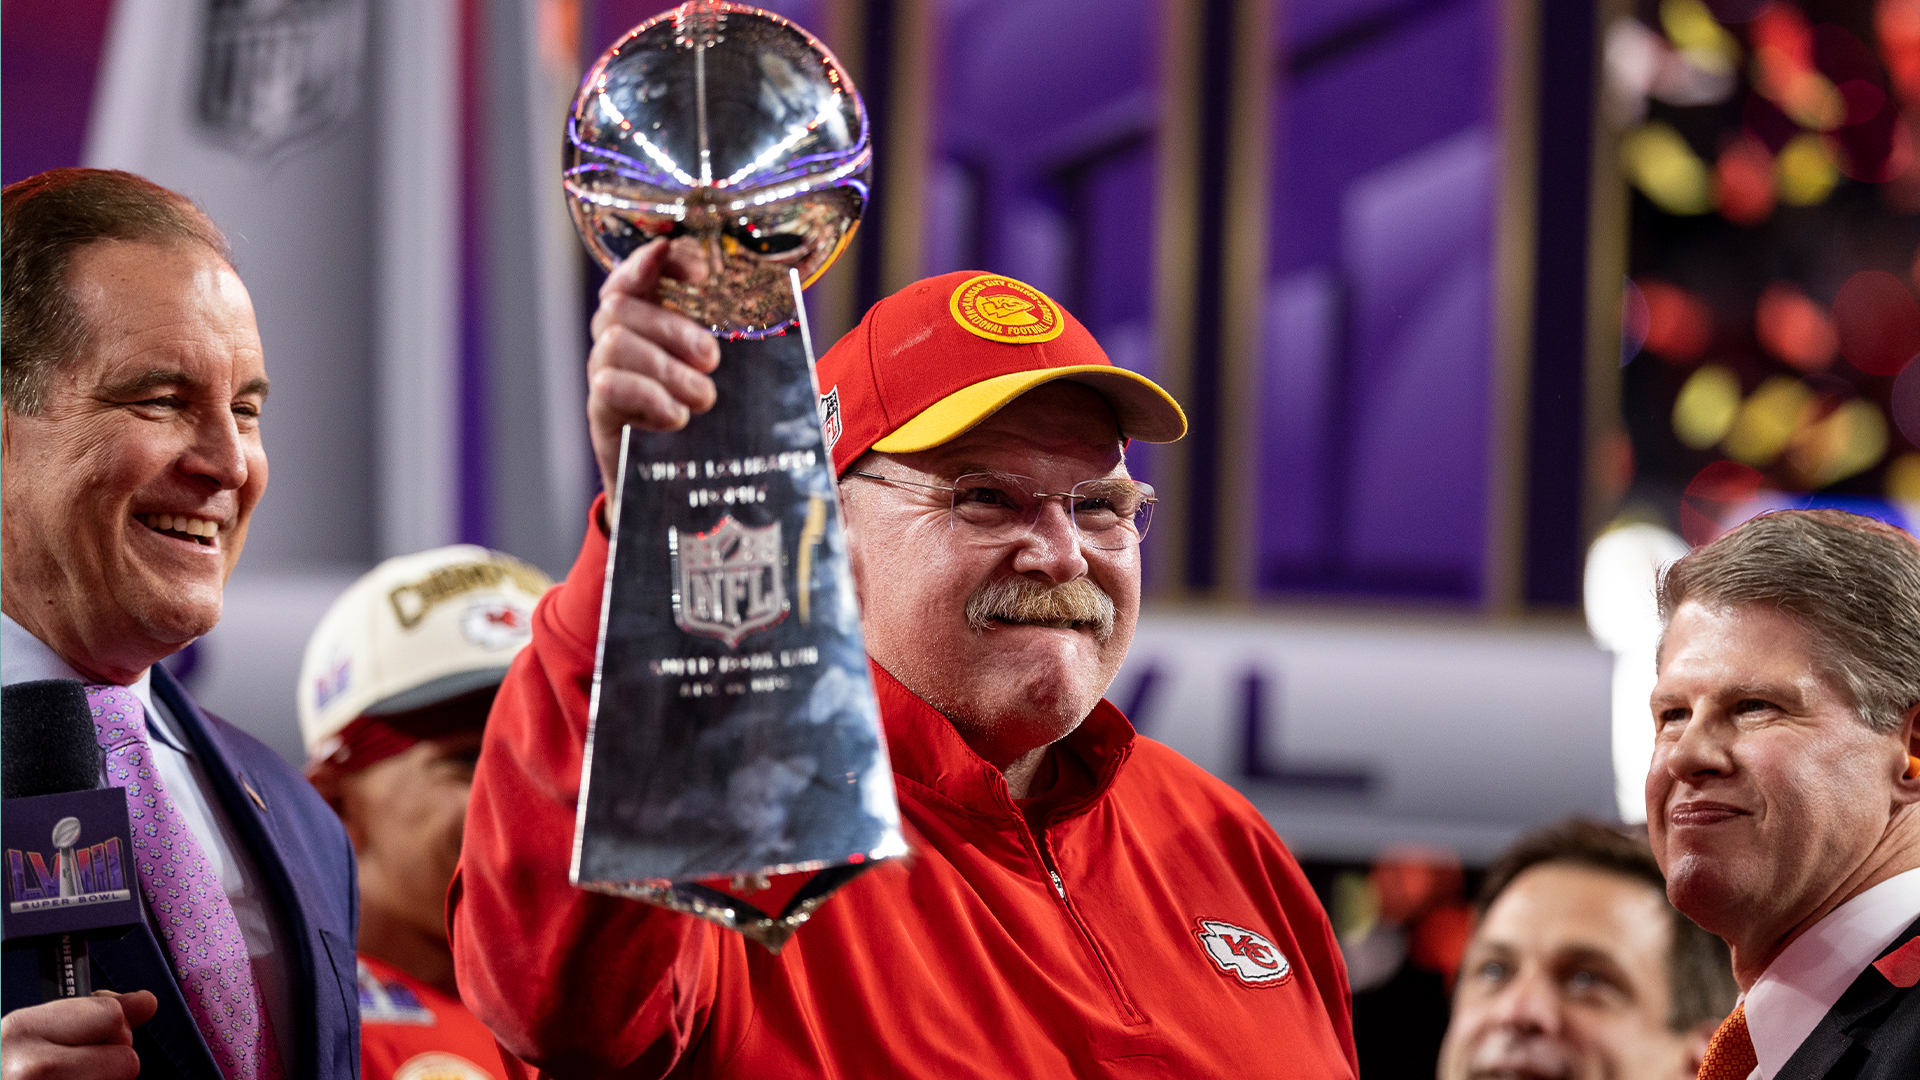 Chiefs Head Coach Andy Reid’s Retirement Decision Sparks Controversy with Bill Belichick After Super Bowl Win